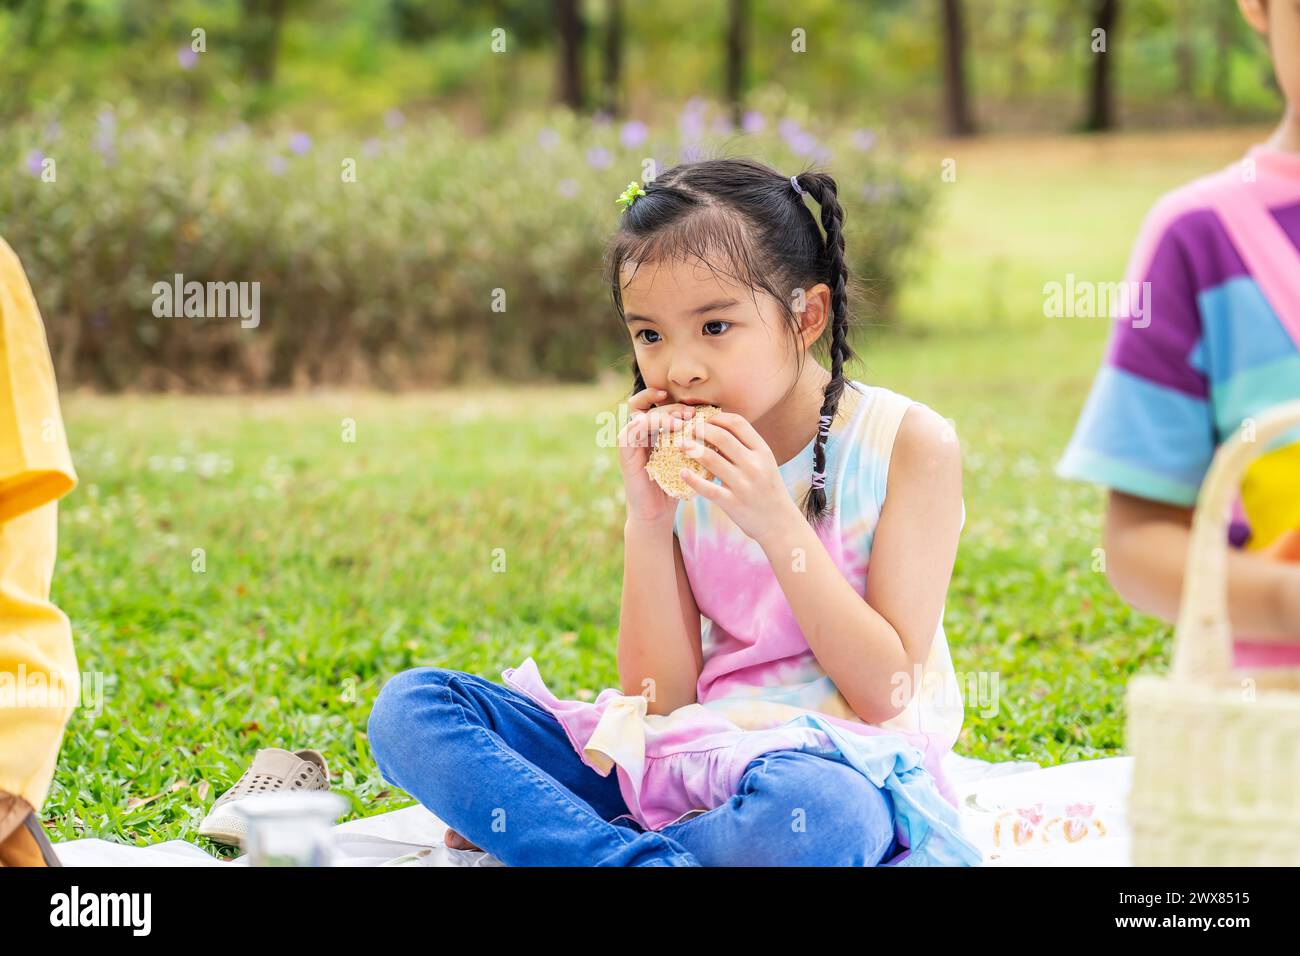 Two young girls on a picnic blanket outdoors Stock Photo